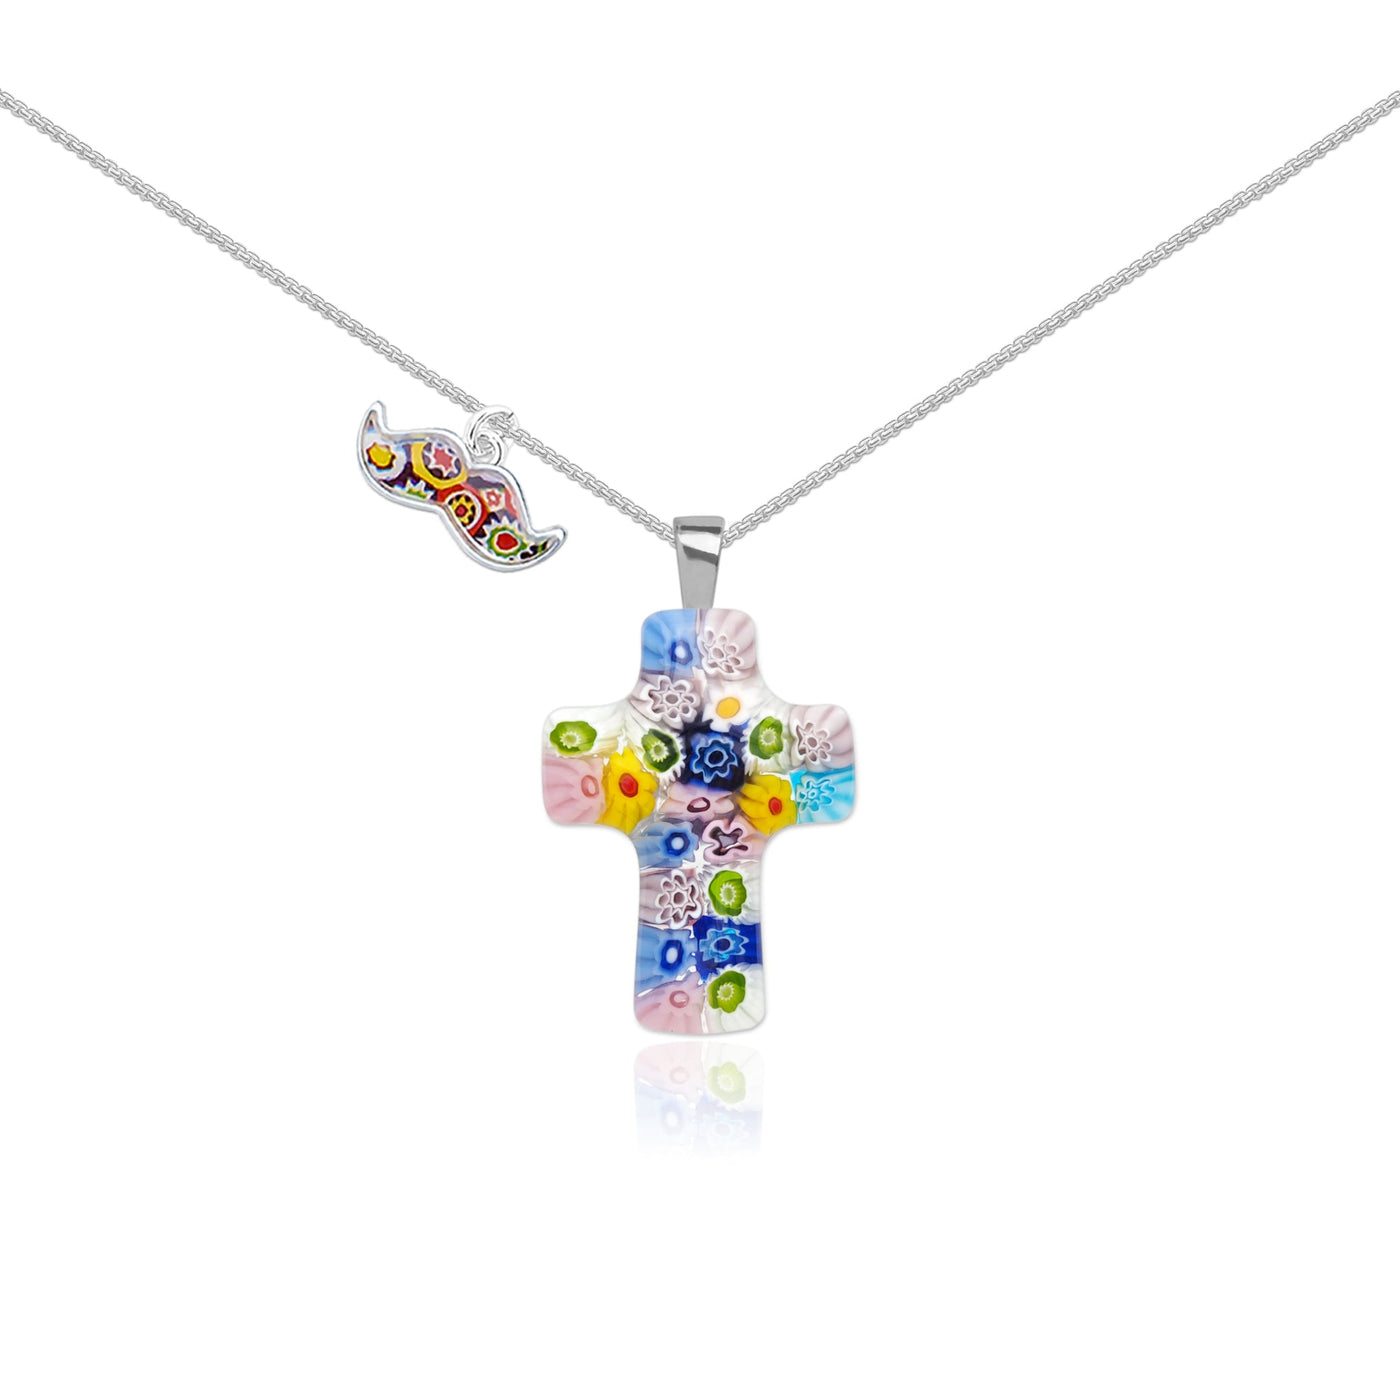 Cross in Bloom Necklace with Micro-Floral - 1mm 925 Sterling Silver [+USD10.00] - Pendant Necklace